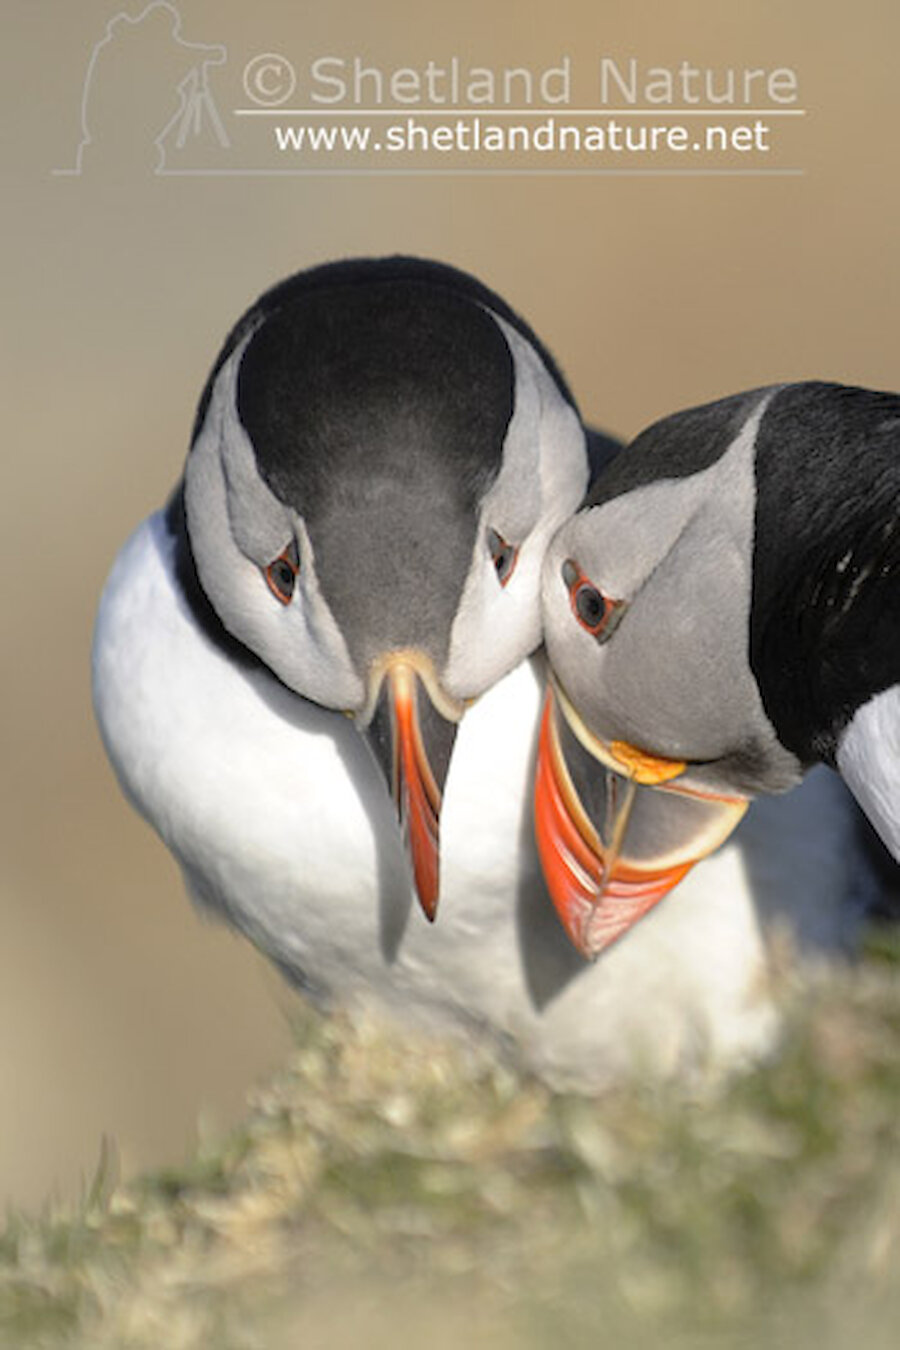 Bill tapping plays an integral role in strengthening pair bonds and is one of the main courtship displays. Puffins may meet and breed with the same partner year after year and more often than not use the same burrow.